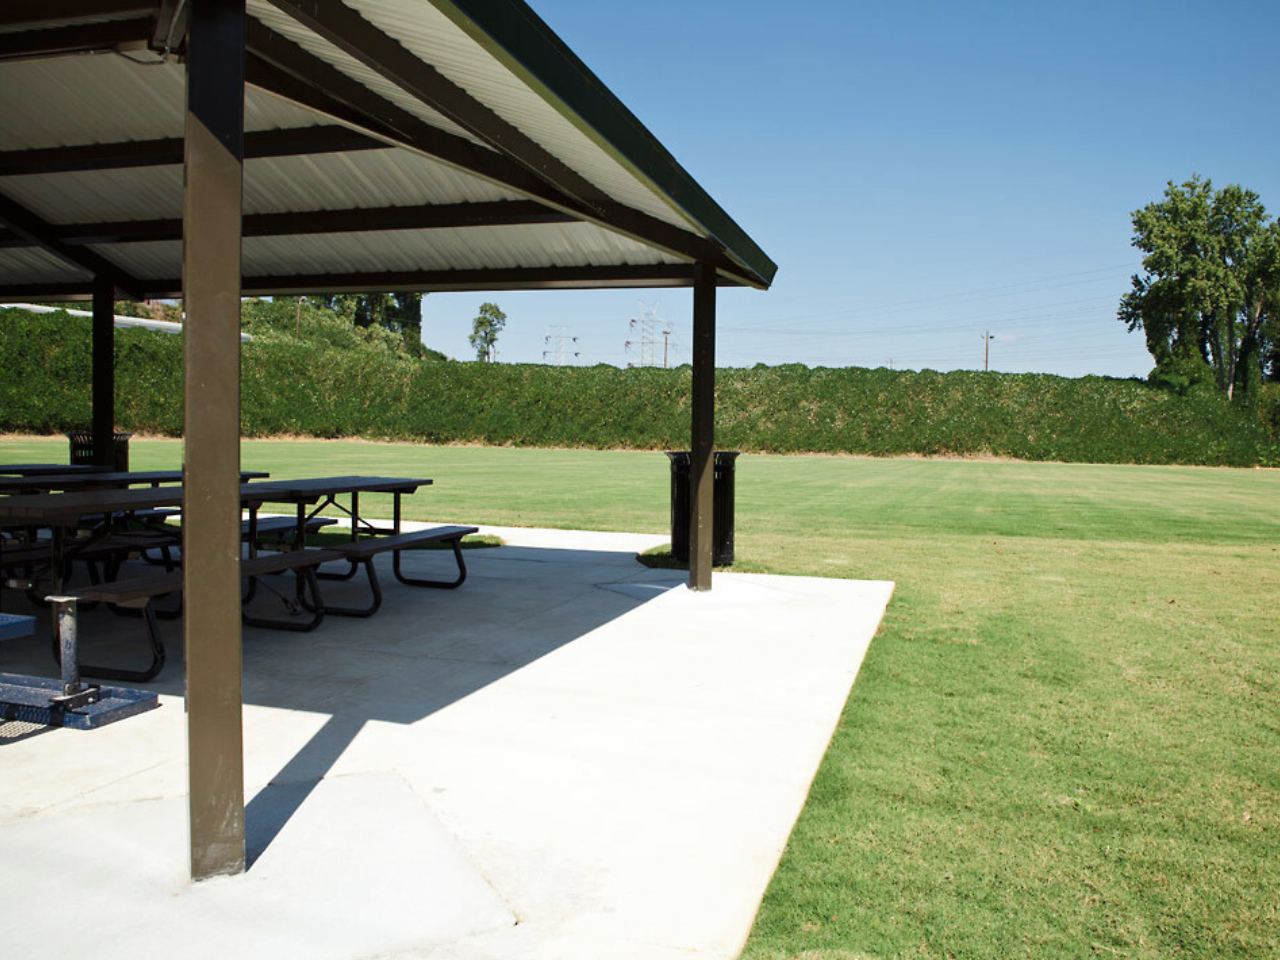 A covered pavilion sits in a green grass field with picnic tables underneath.